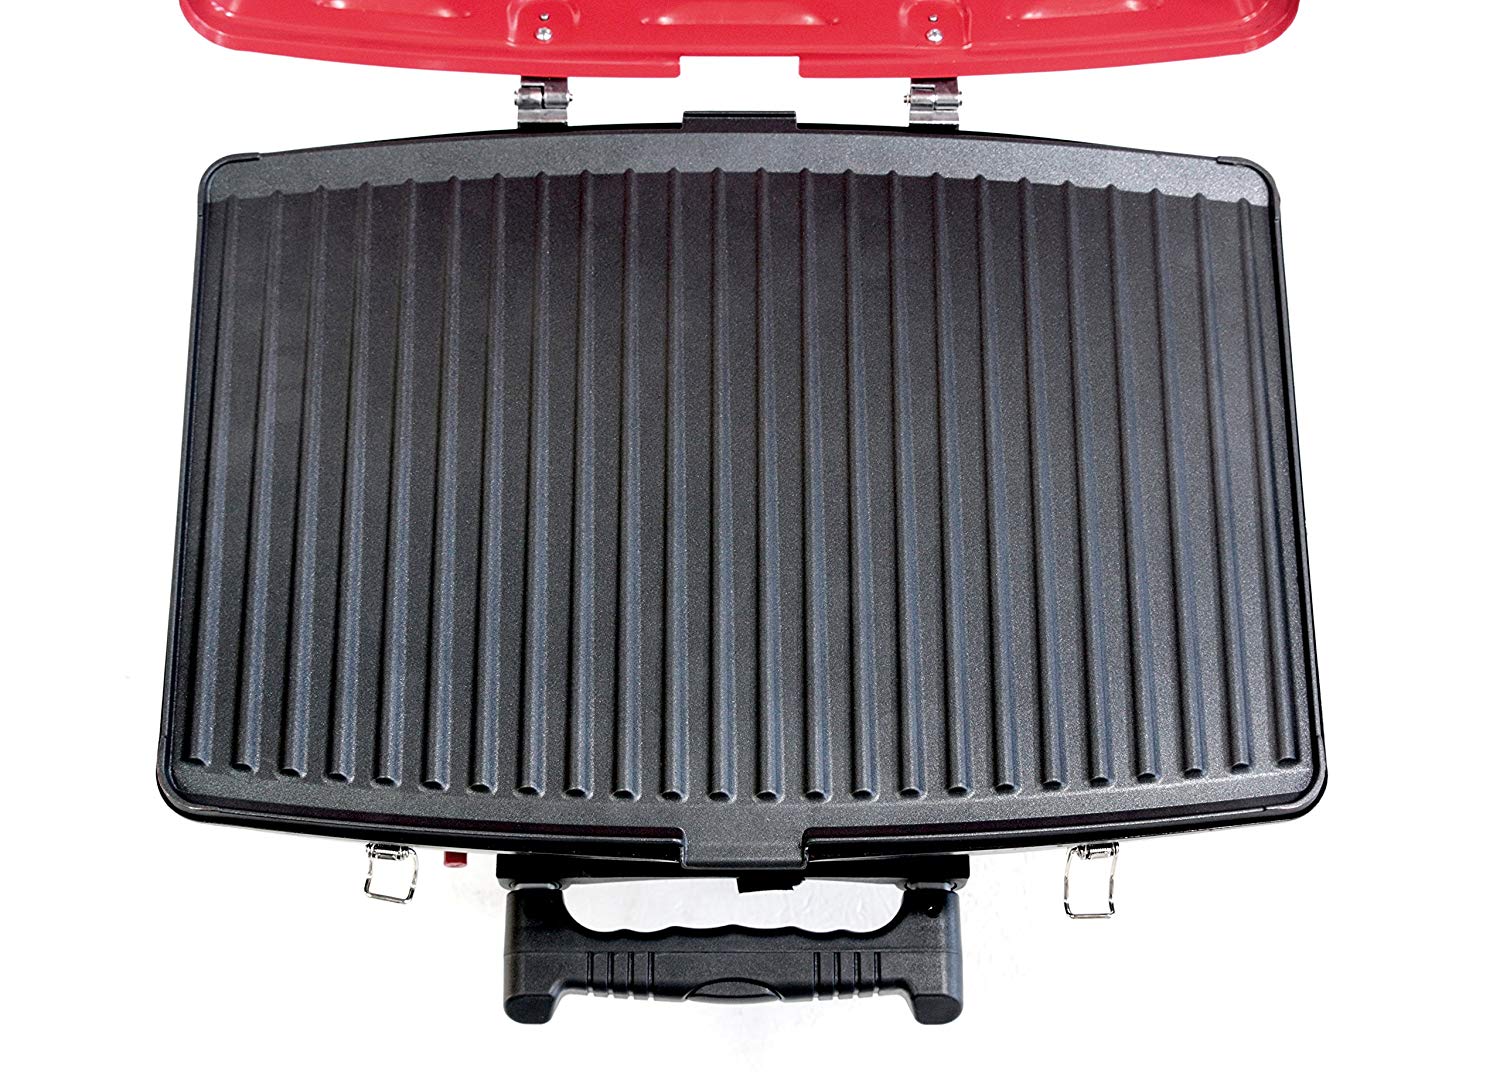 Barbecue Grills Near Me - Buy Electric, Charcoal and Propane Grills At Best Prices